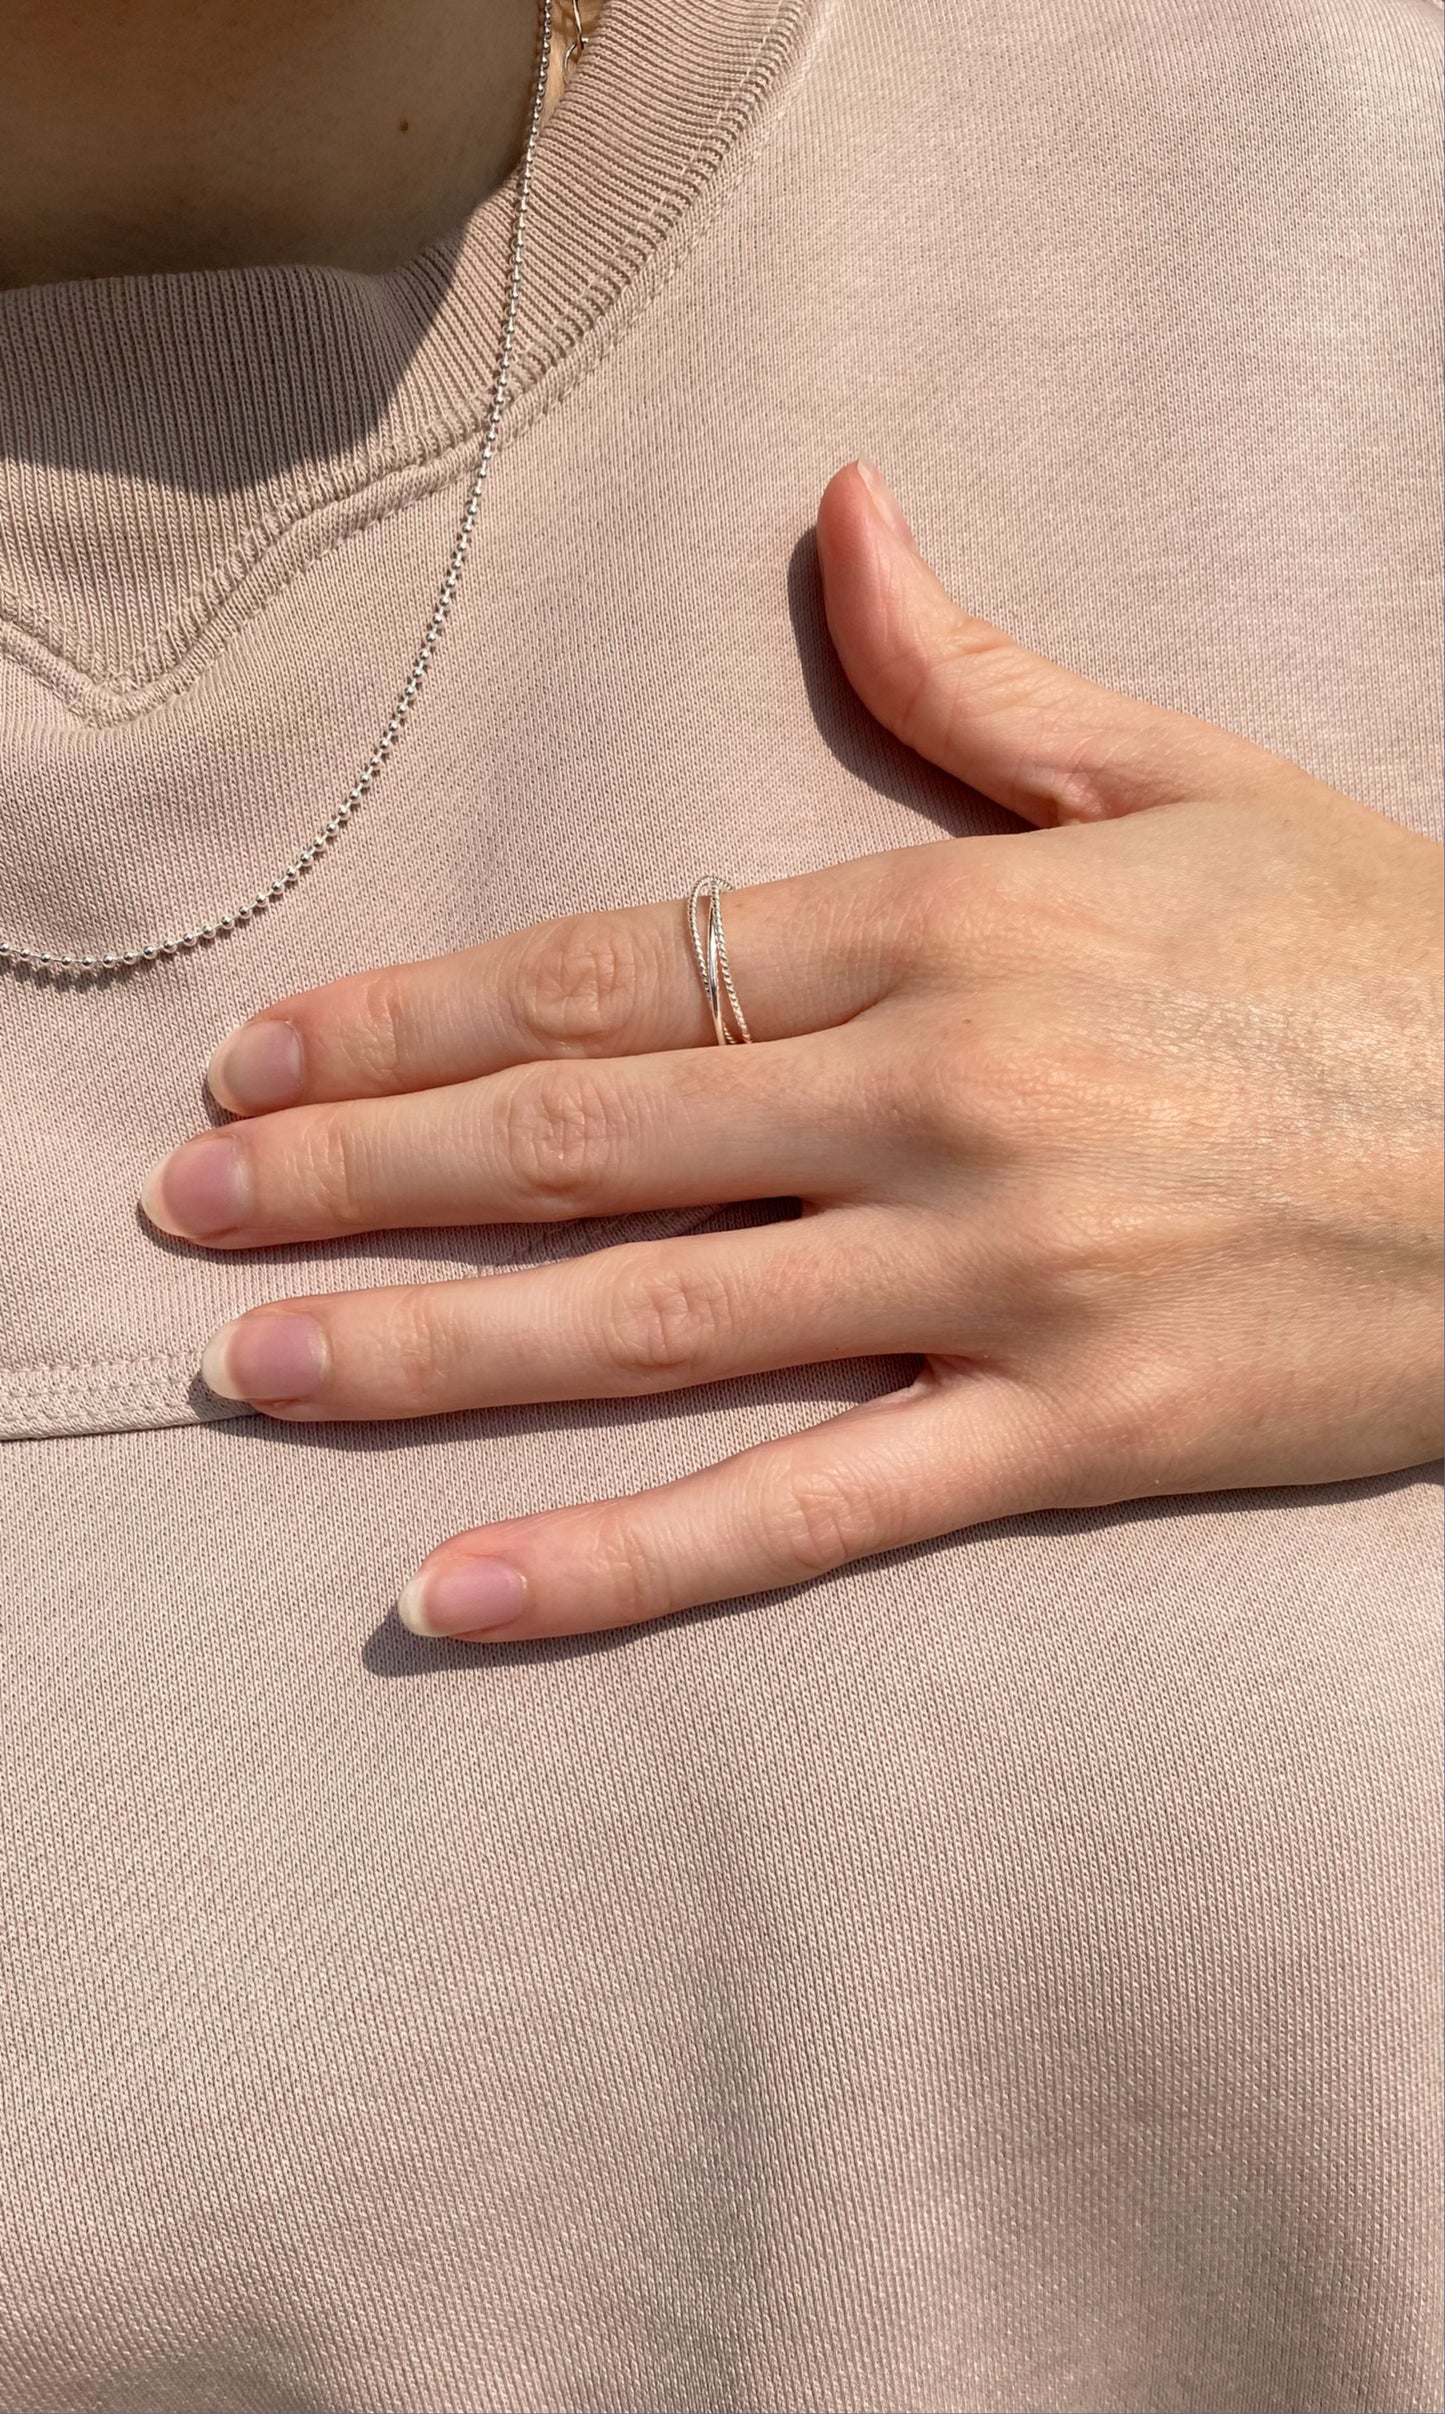 ALLIE - Pure Silvery And Shiny Minimalist Rings ∙ Set Of 3 Sterling Silver Ring  ∙ High Quality Waterproof & Tarnish Free ∙ Thin Band Ring